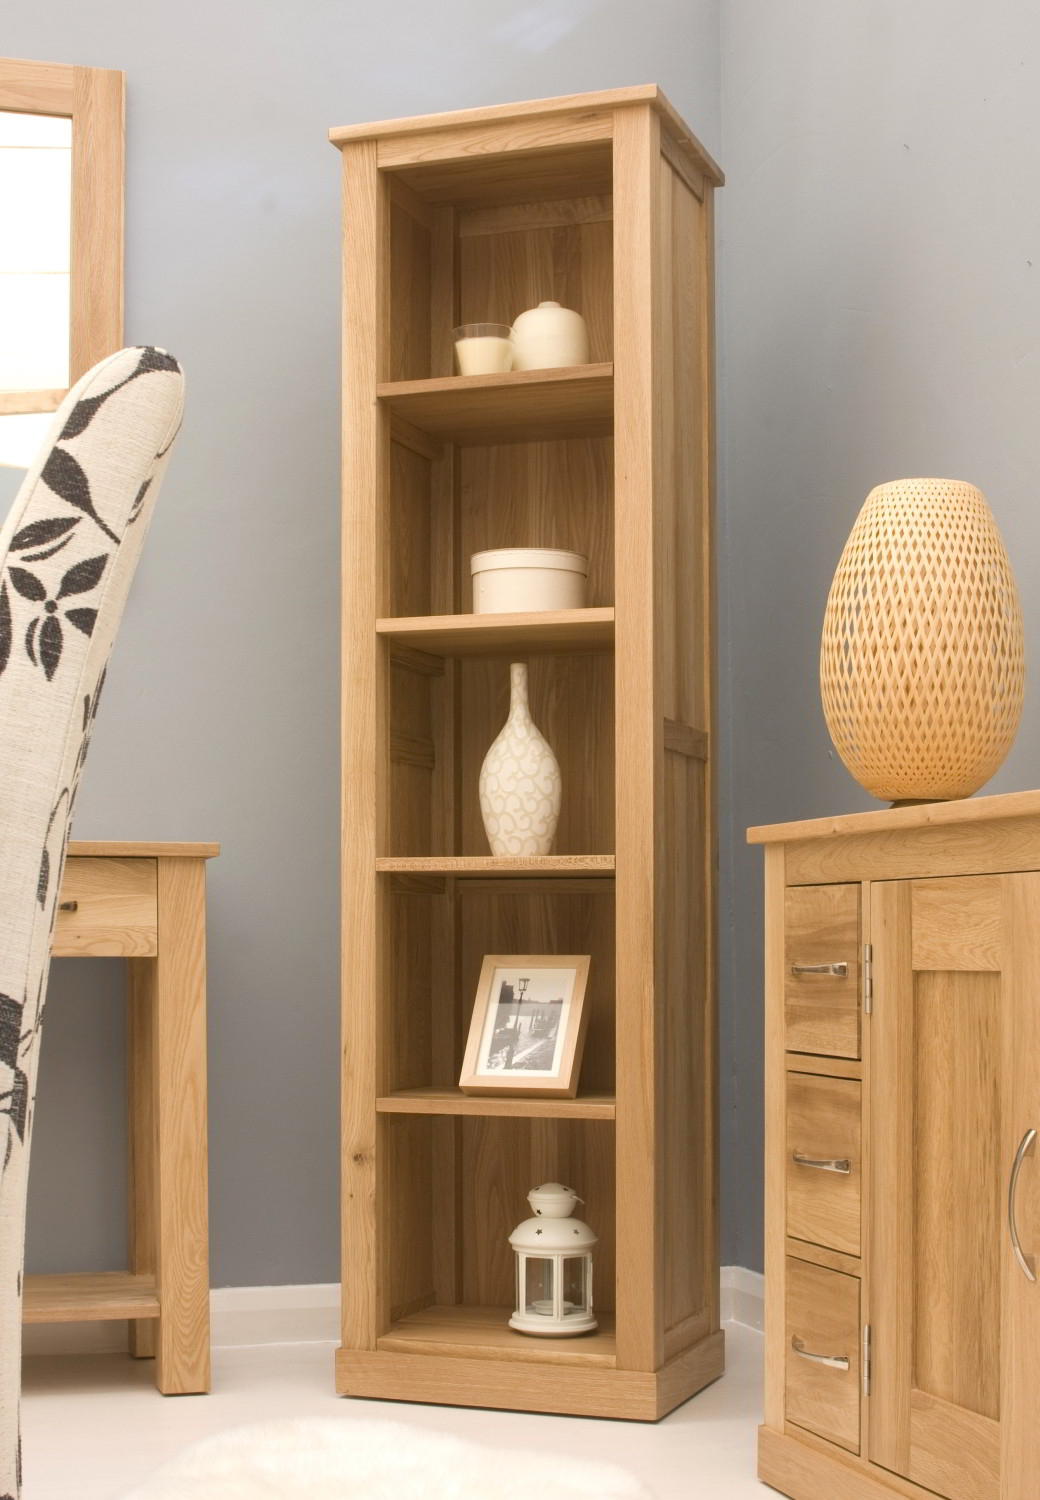 Details About Conran Solid Oak Modern Furniture Narrow Living Room Office Bookcase throughout sizing 1040 X 1500